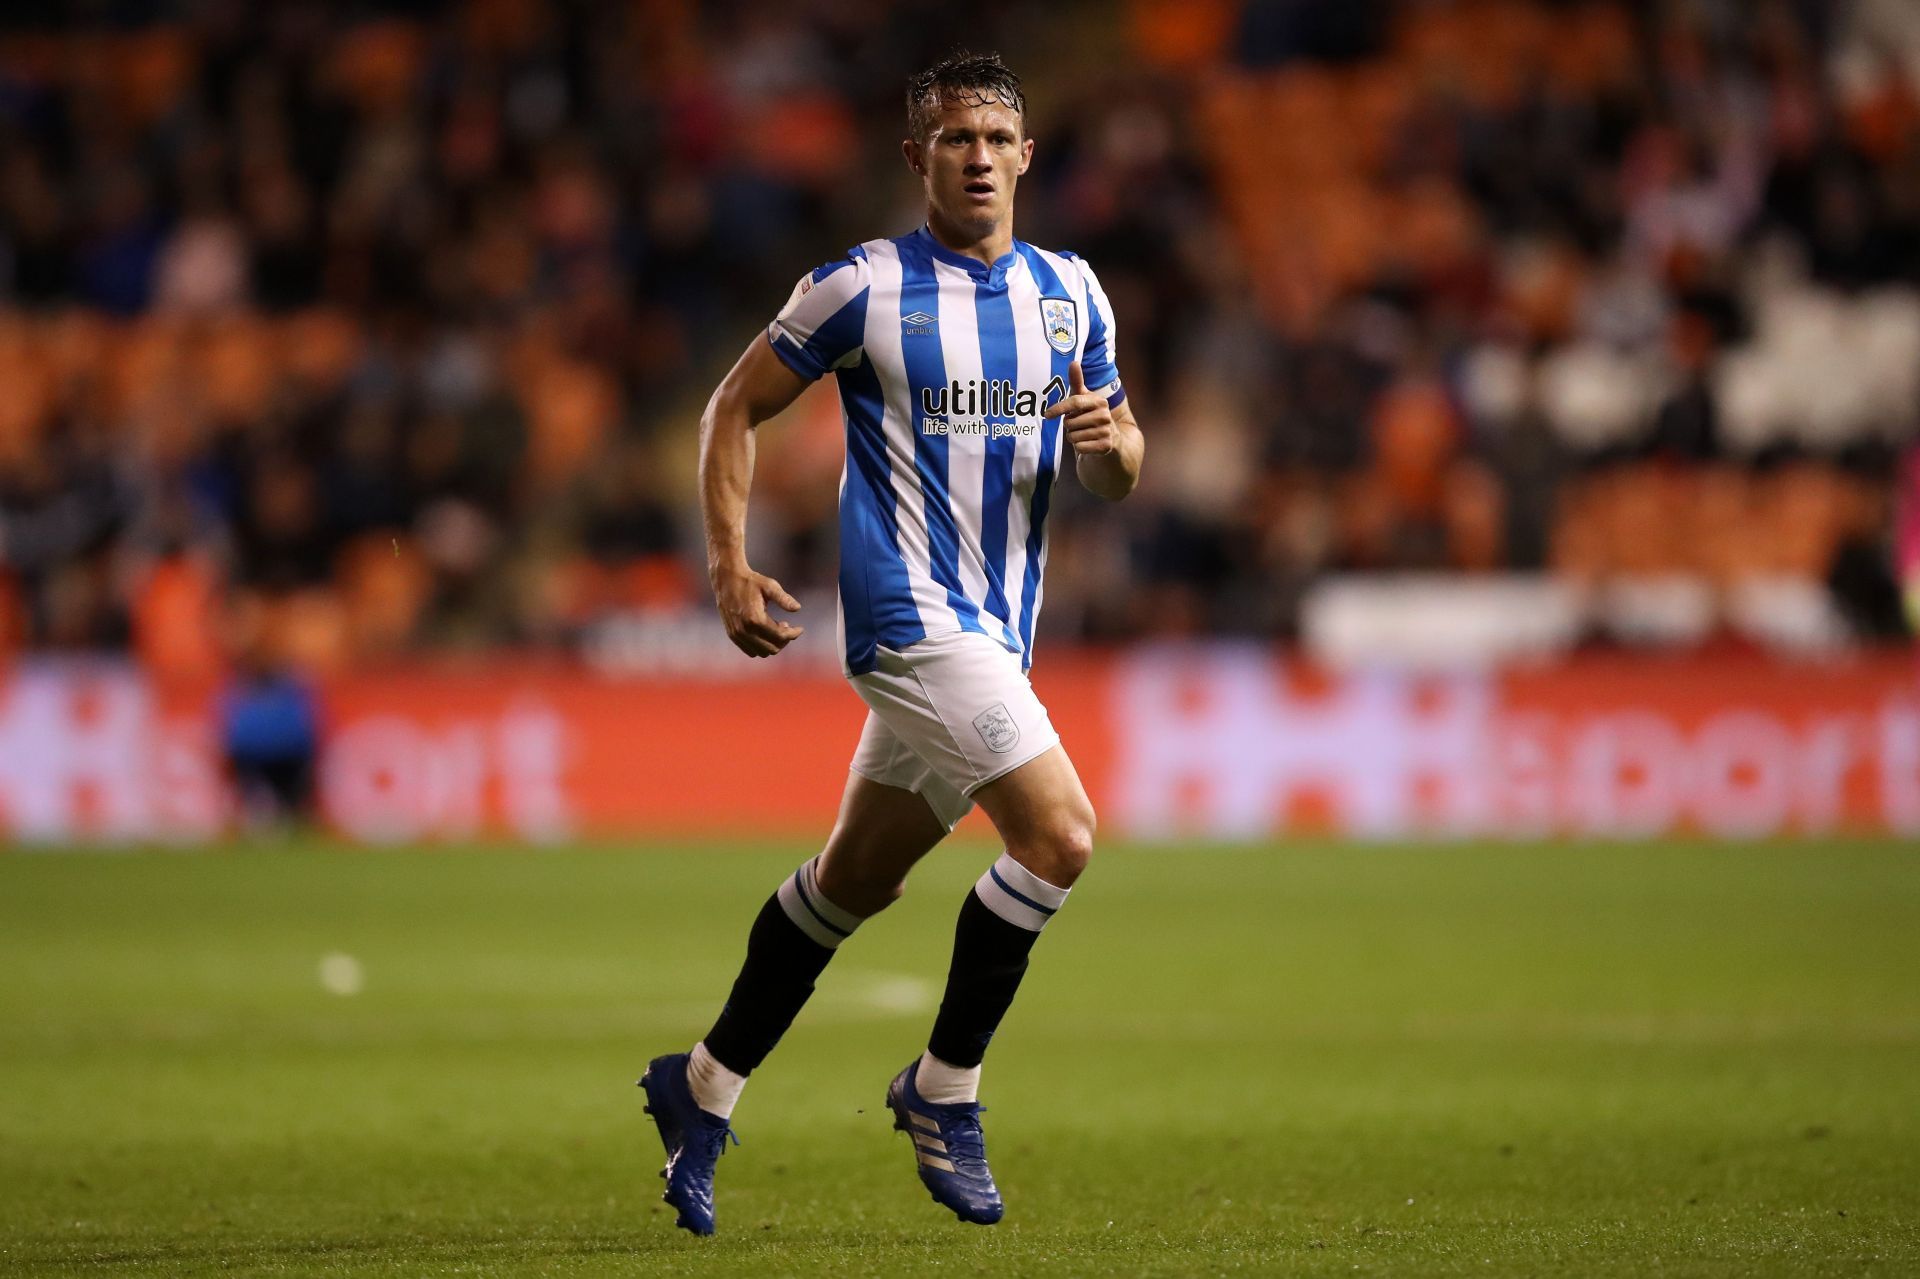 Hogg will be a huge miss for Huddersfield